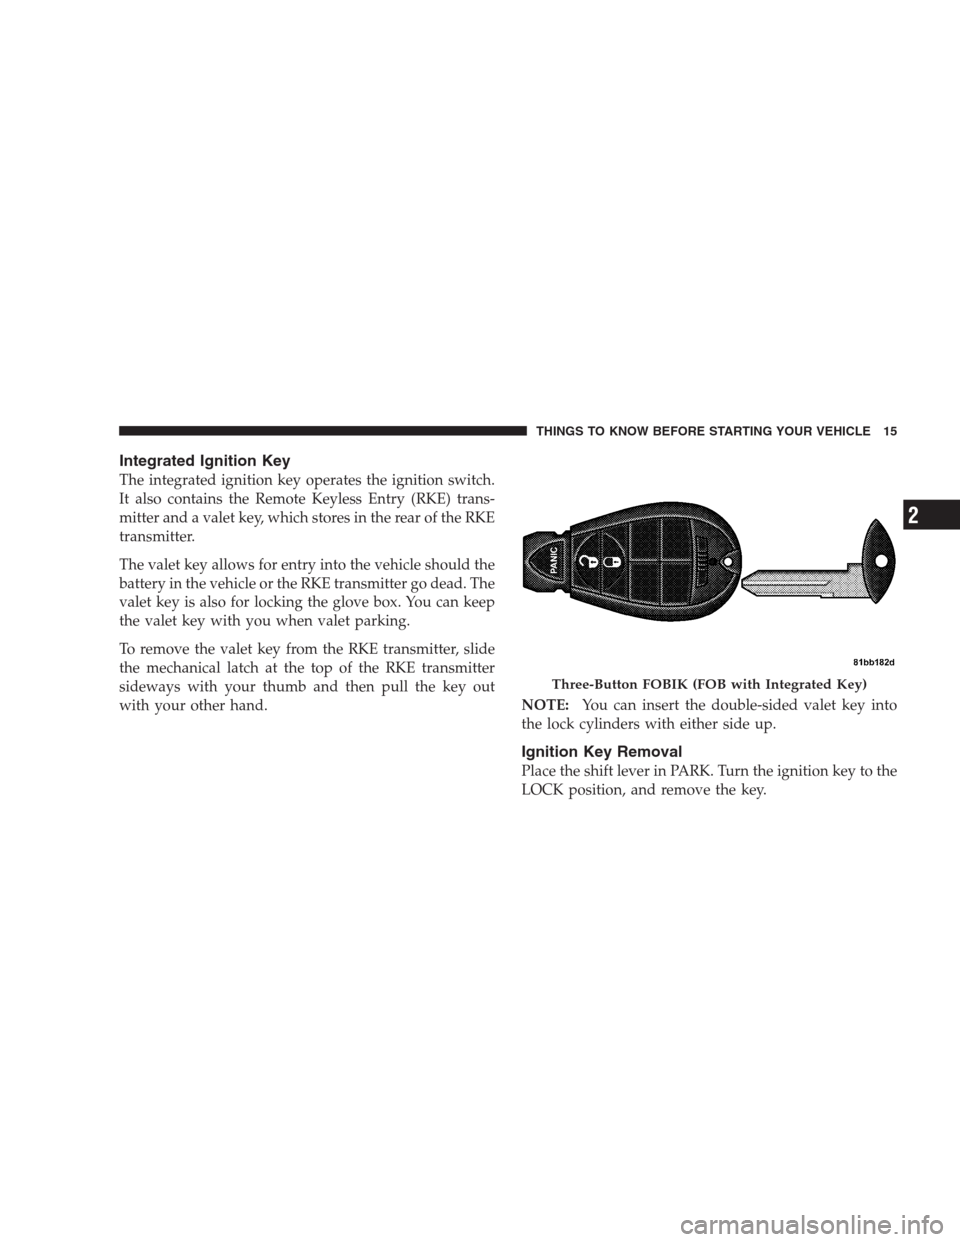 JEEP COMMANDER 2009 1.G User Guide Integrated Ignition Key
The integrated ignition key operates the ignition switch.
It also contains the Remote Keyless Entry (RKE) trans-
mitter and a valet key, which stores in the rear of the RKE
tra